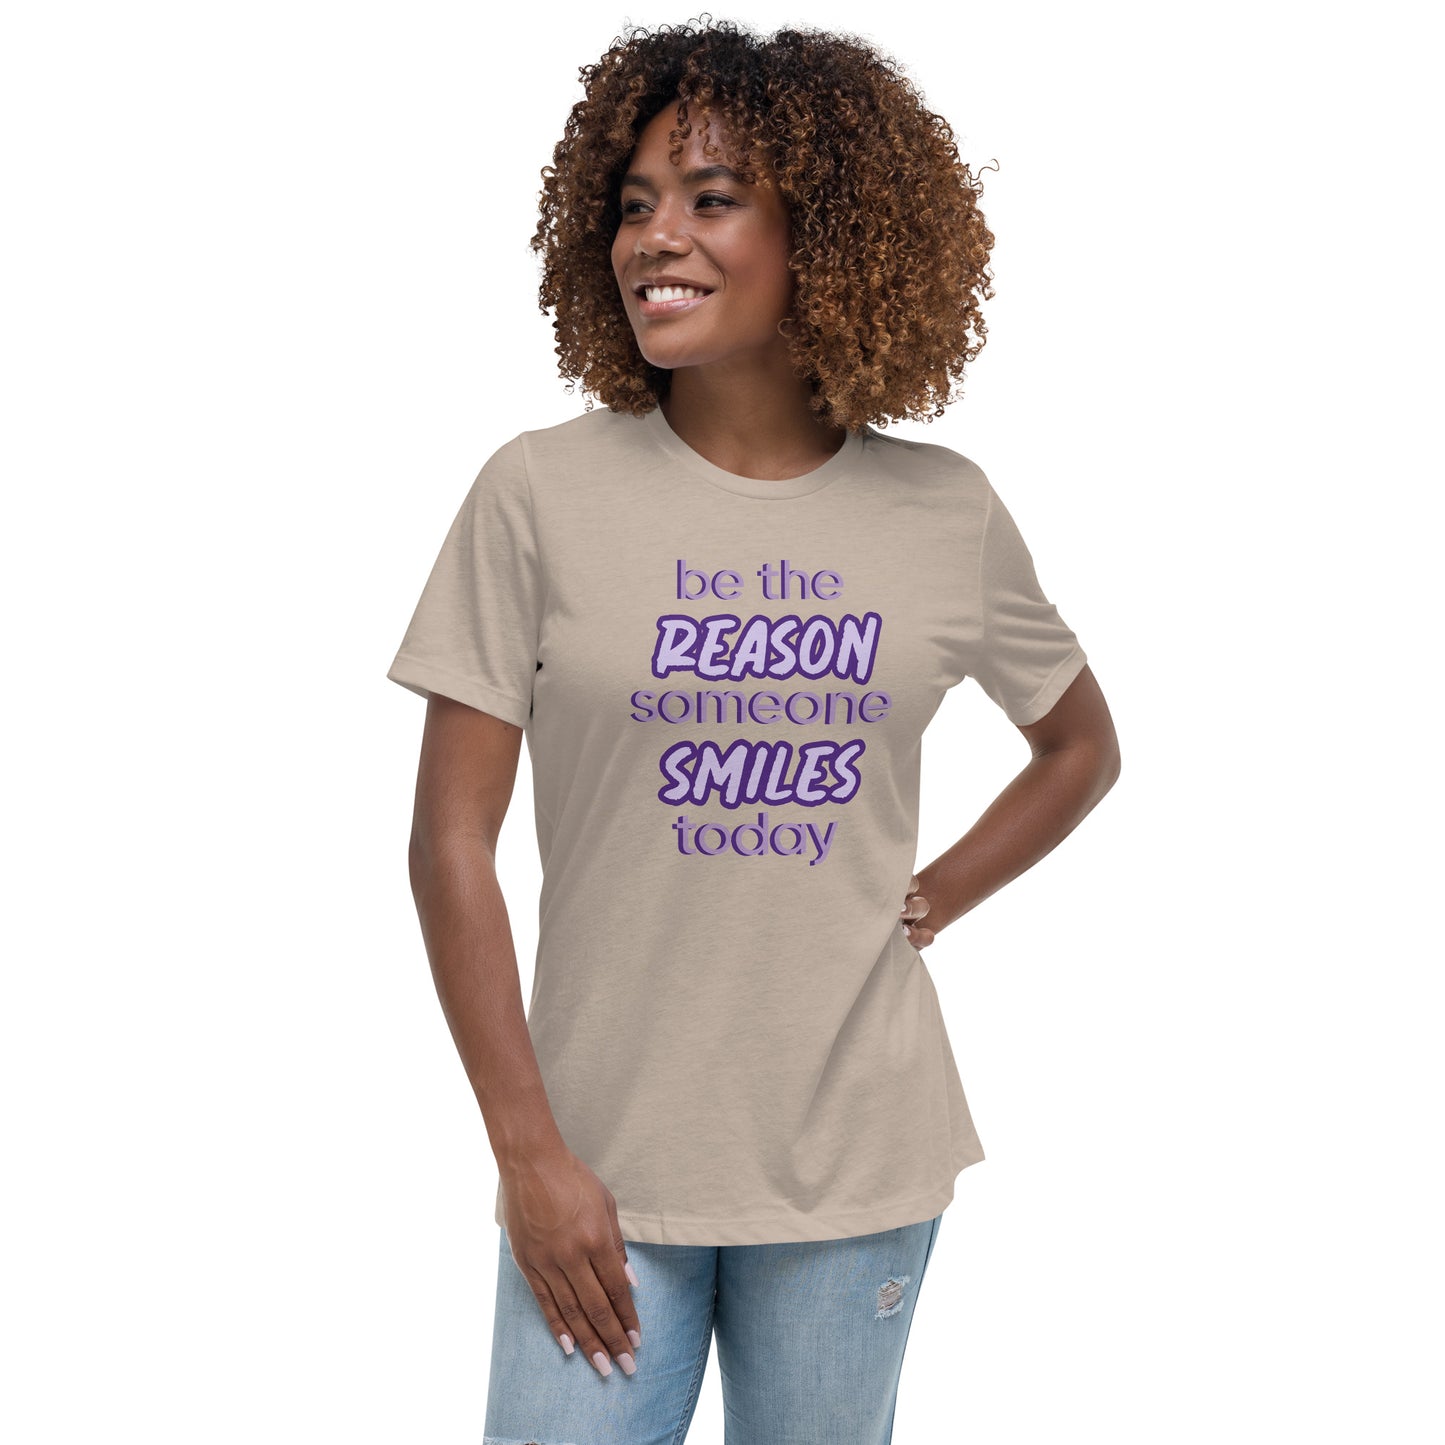 Woman with stone T-shirt and the quote "be the reason someone smiles today" in purple on it. 